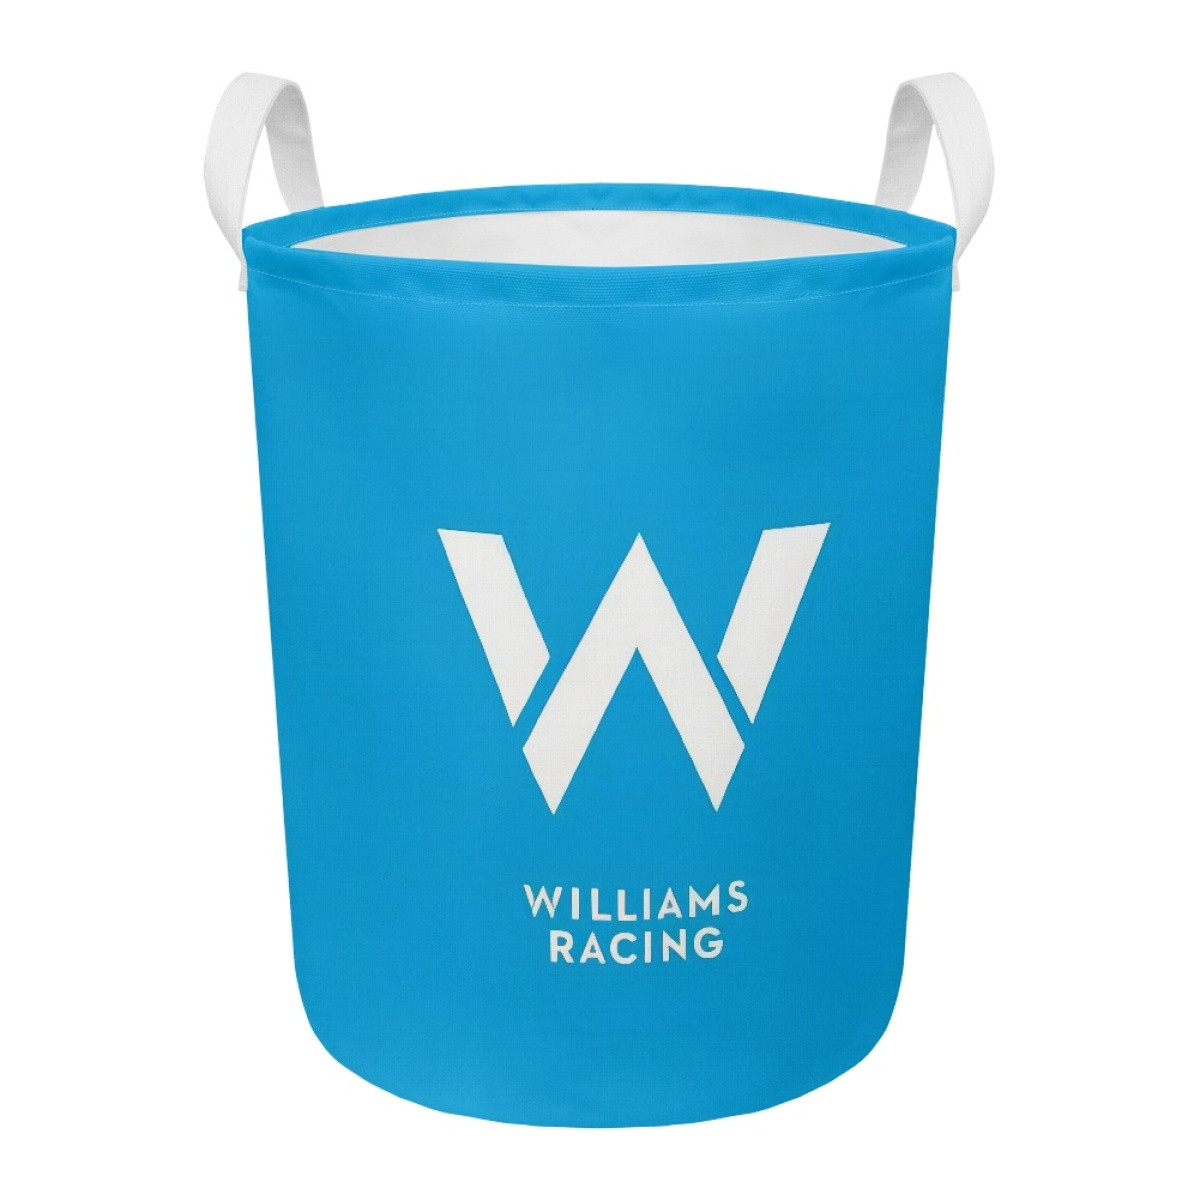 F1 Formula One Williams Racing Clothes Hamper Laundry Basket - Williams Racing Logo On Blue Background